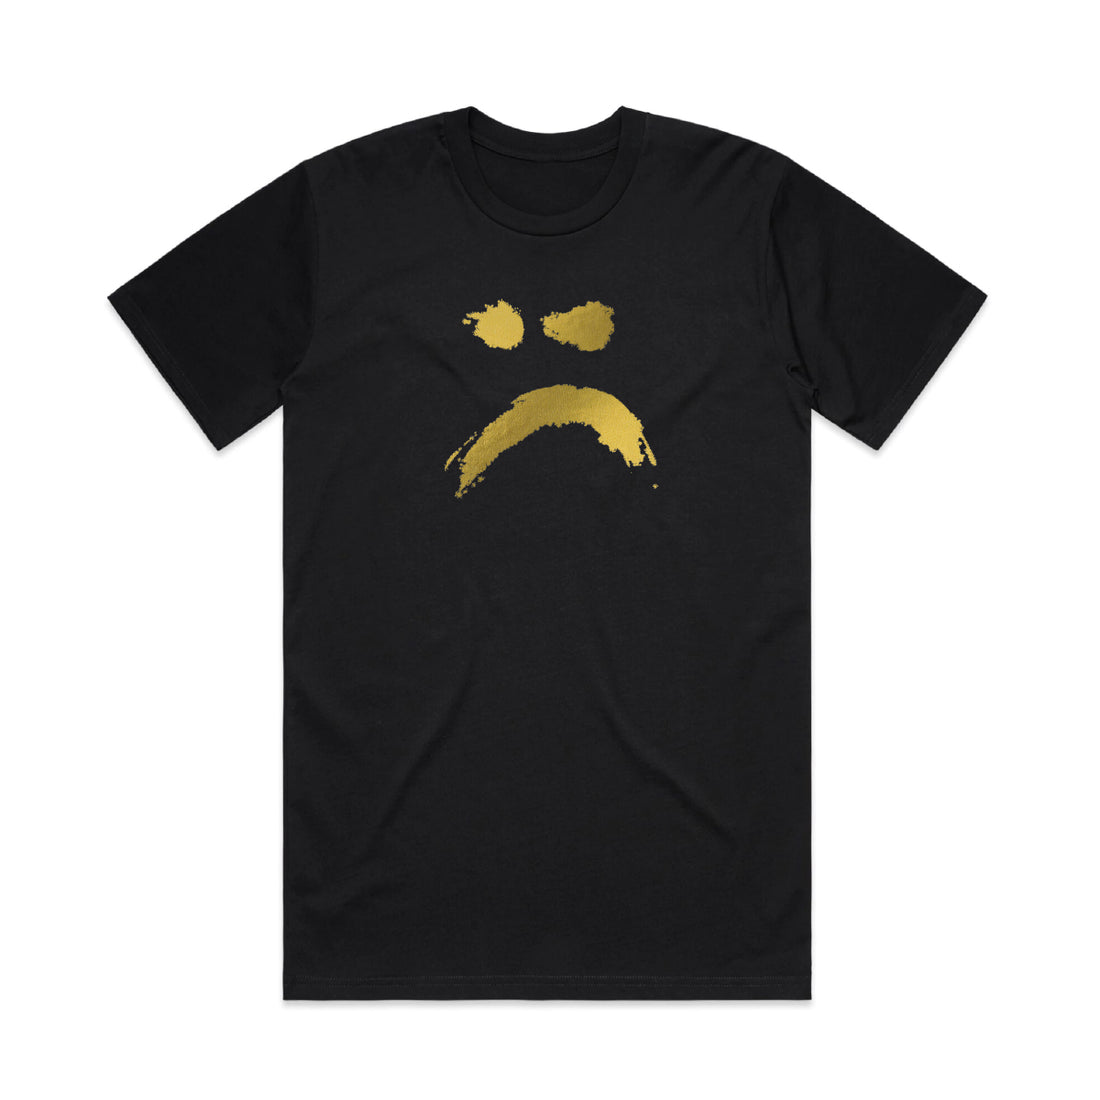 Gallant - Ology Gold Sad Face (5th Anniversary Special Edition) Tee